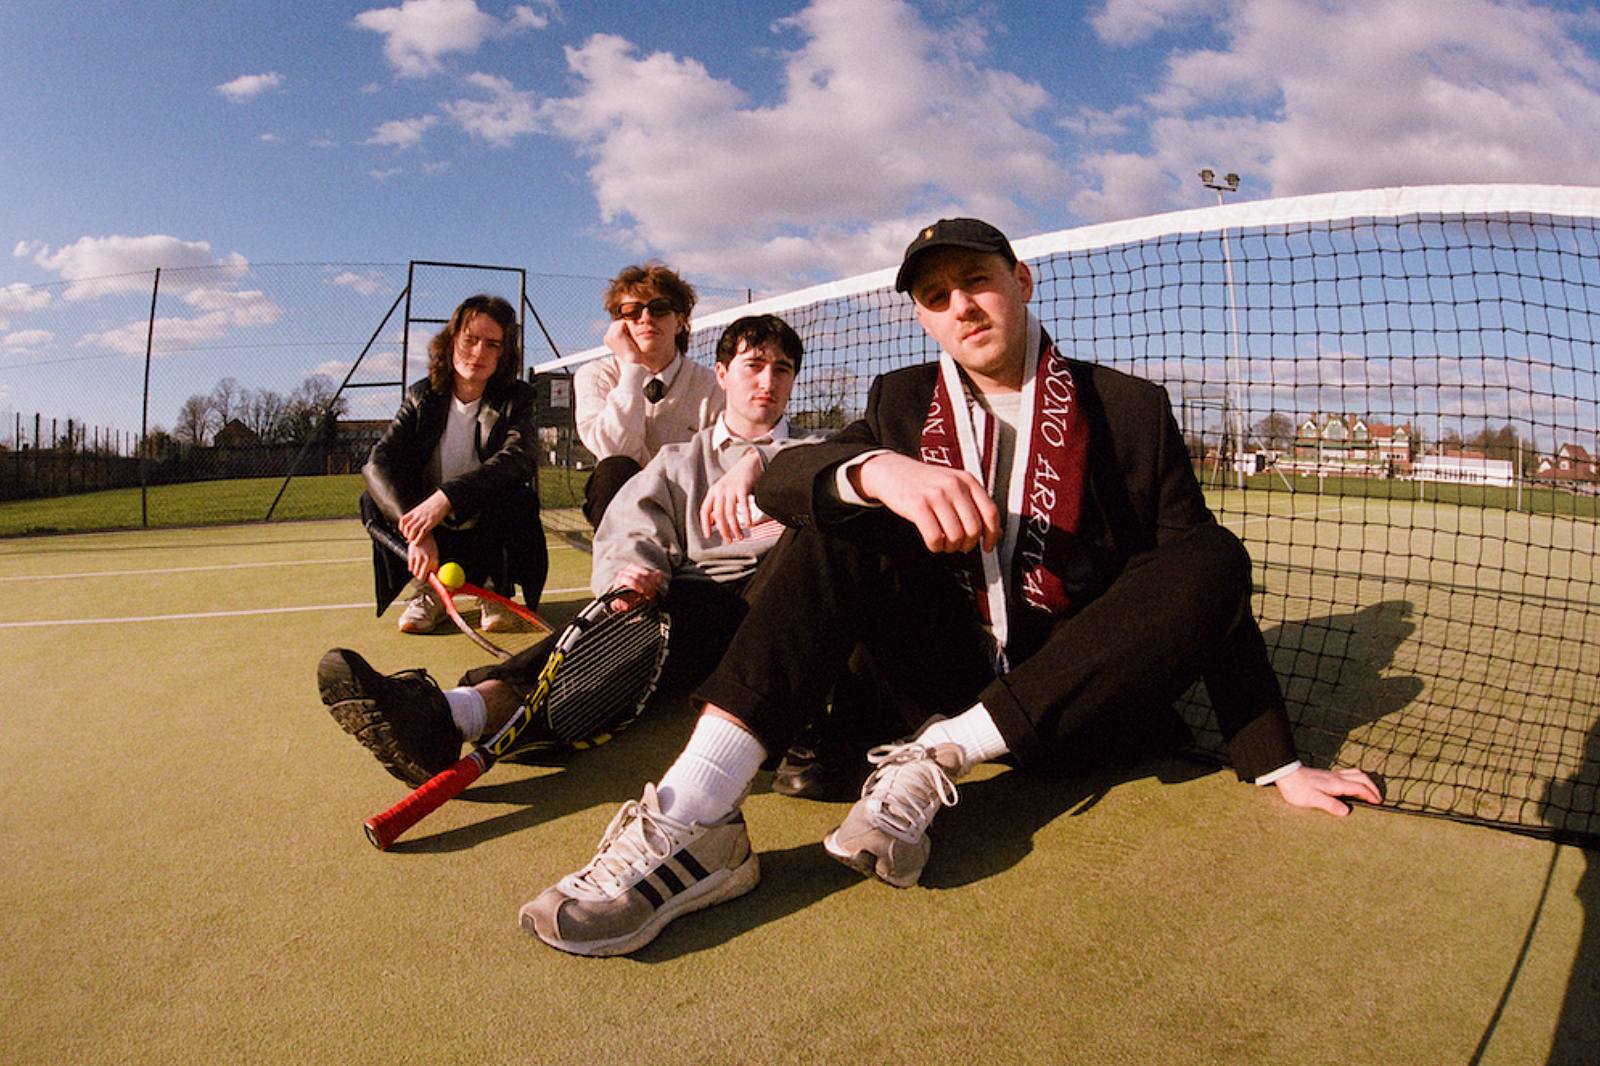 Courting drop new track 'Tennis'